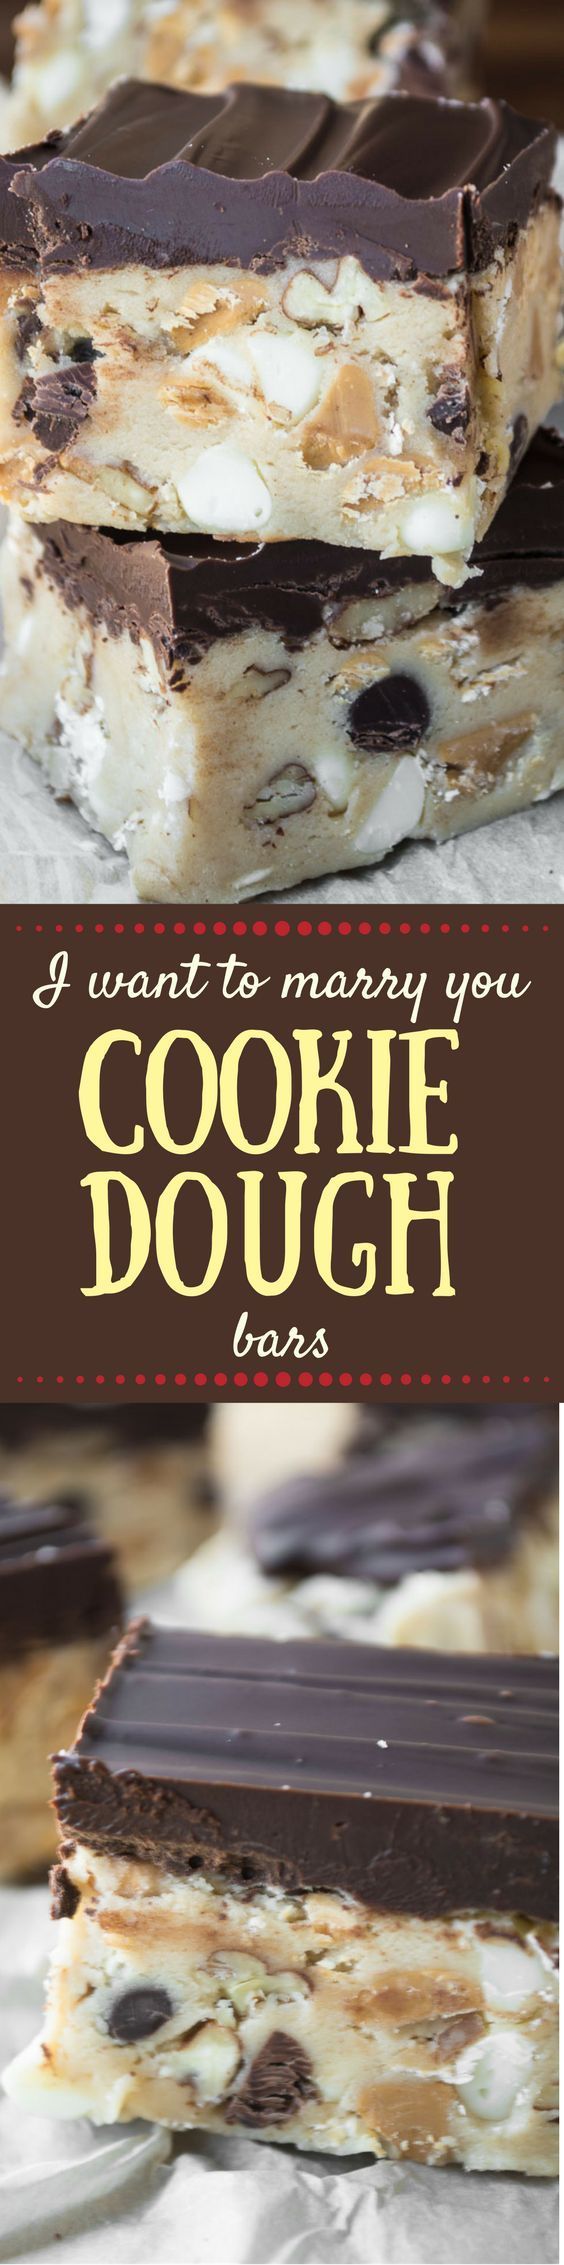 I Want To Marry You Cookie Dough Bars are chocked full of chocolate chips, white chocolate chips, peanut butter chips, oats, and